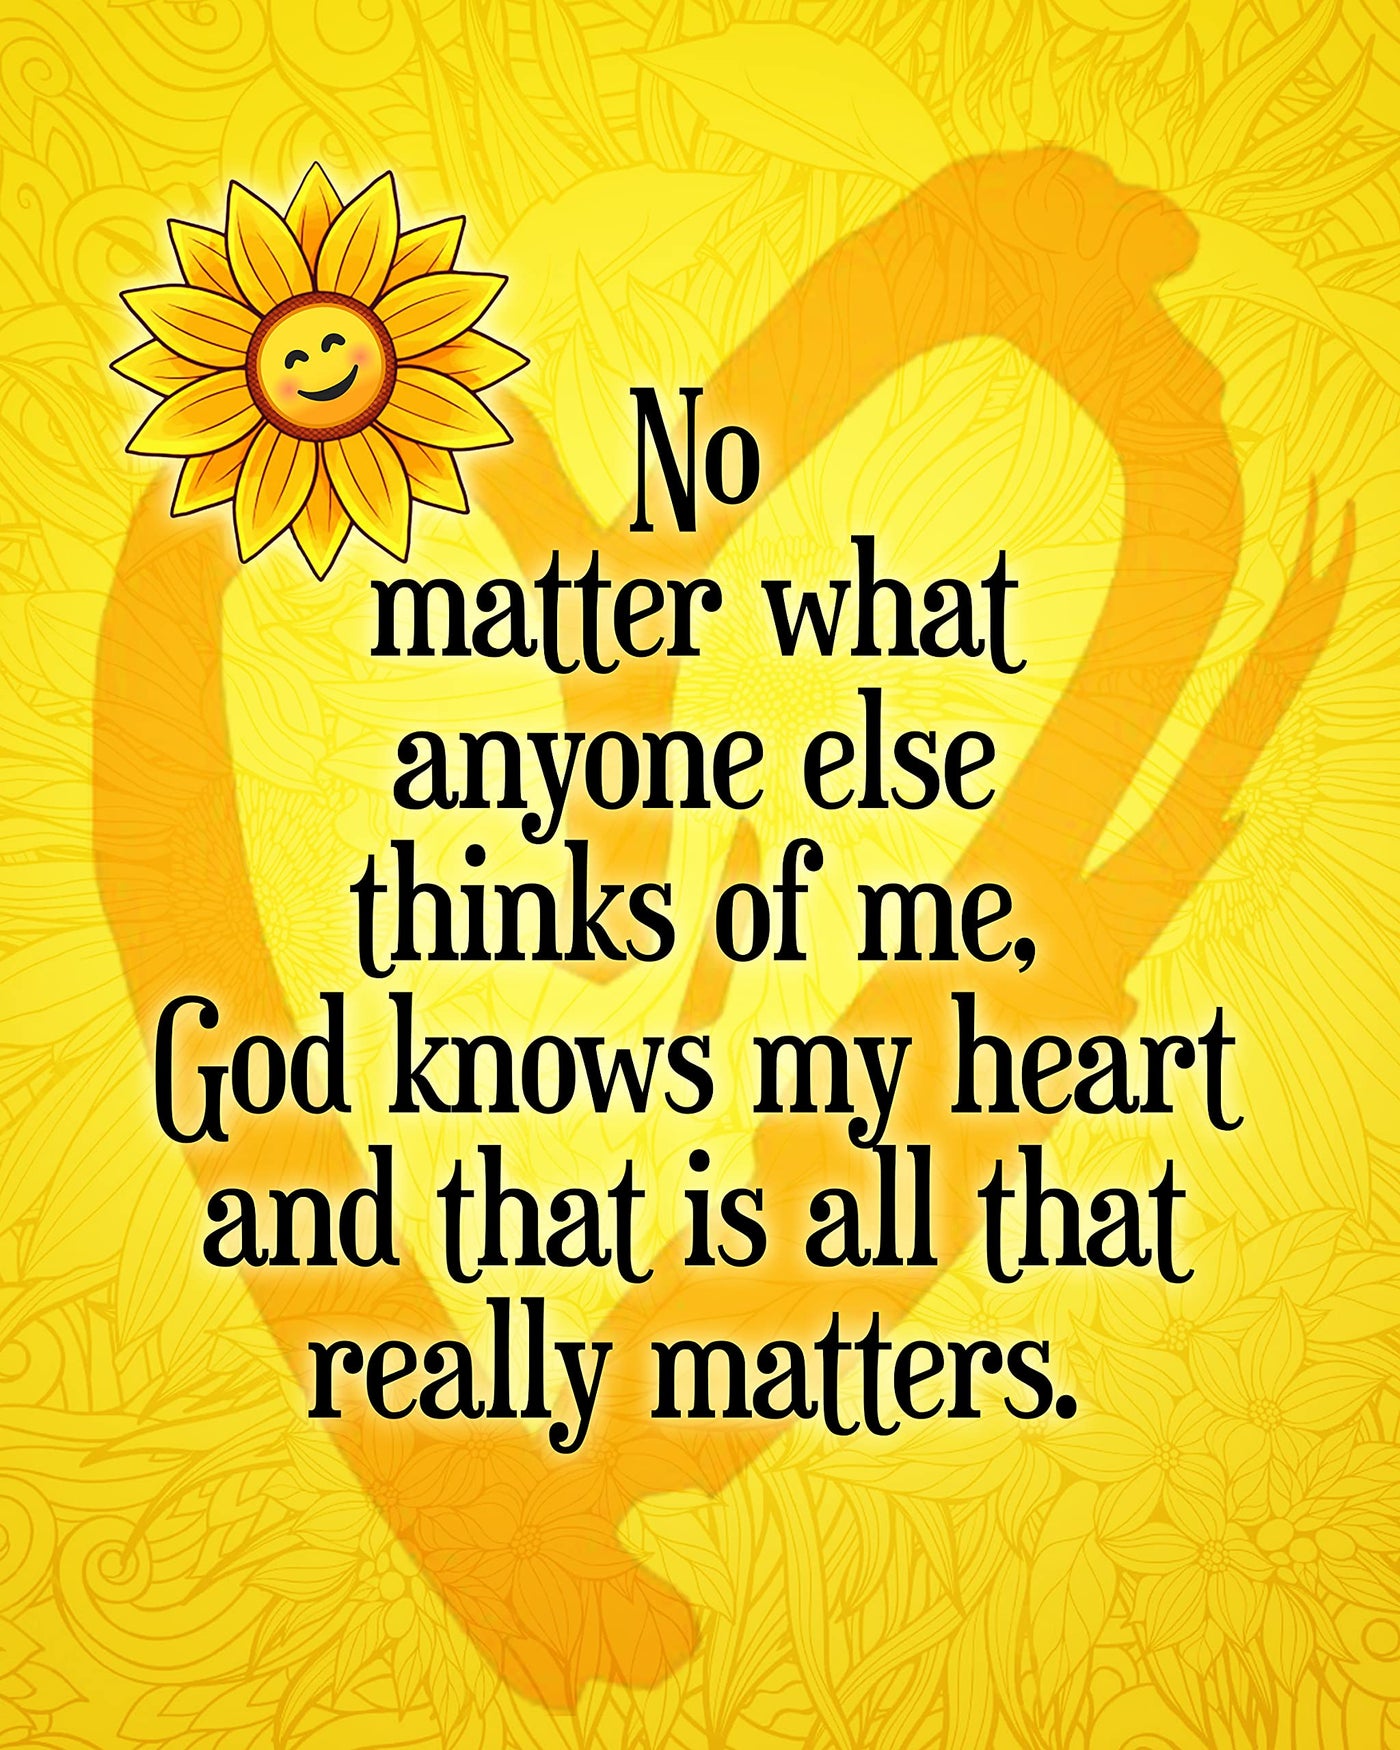 God Knows My Heart-All That Really Matters Inspirational Christian Wall Art -8x10" Yellow Heart & Sunflower Print -Ready to Frame. Motivational Home-Office-Church-School Decor. Great Gift of Faith!